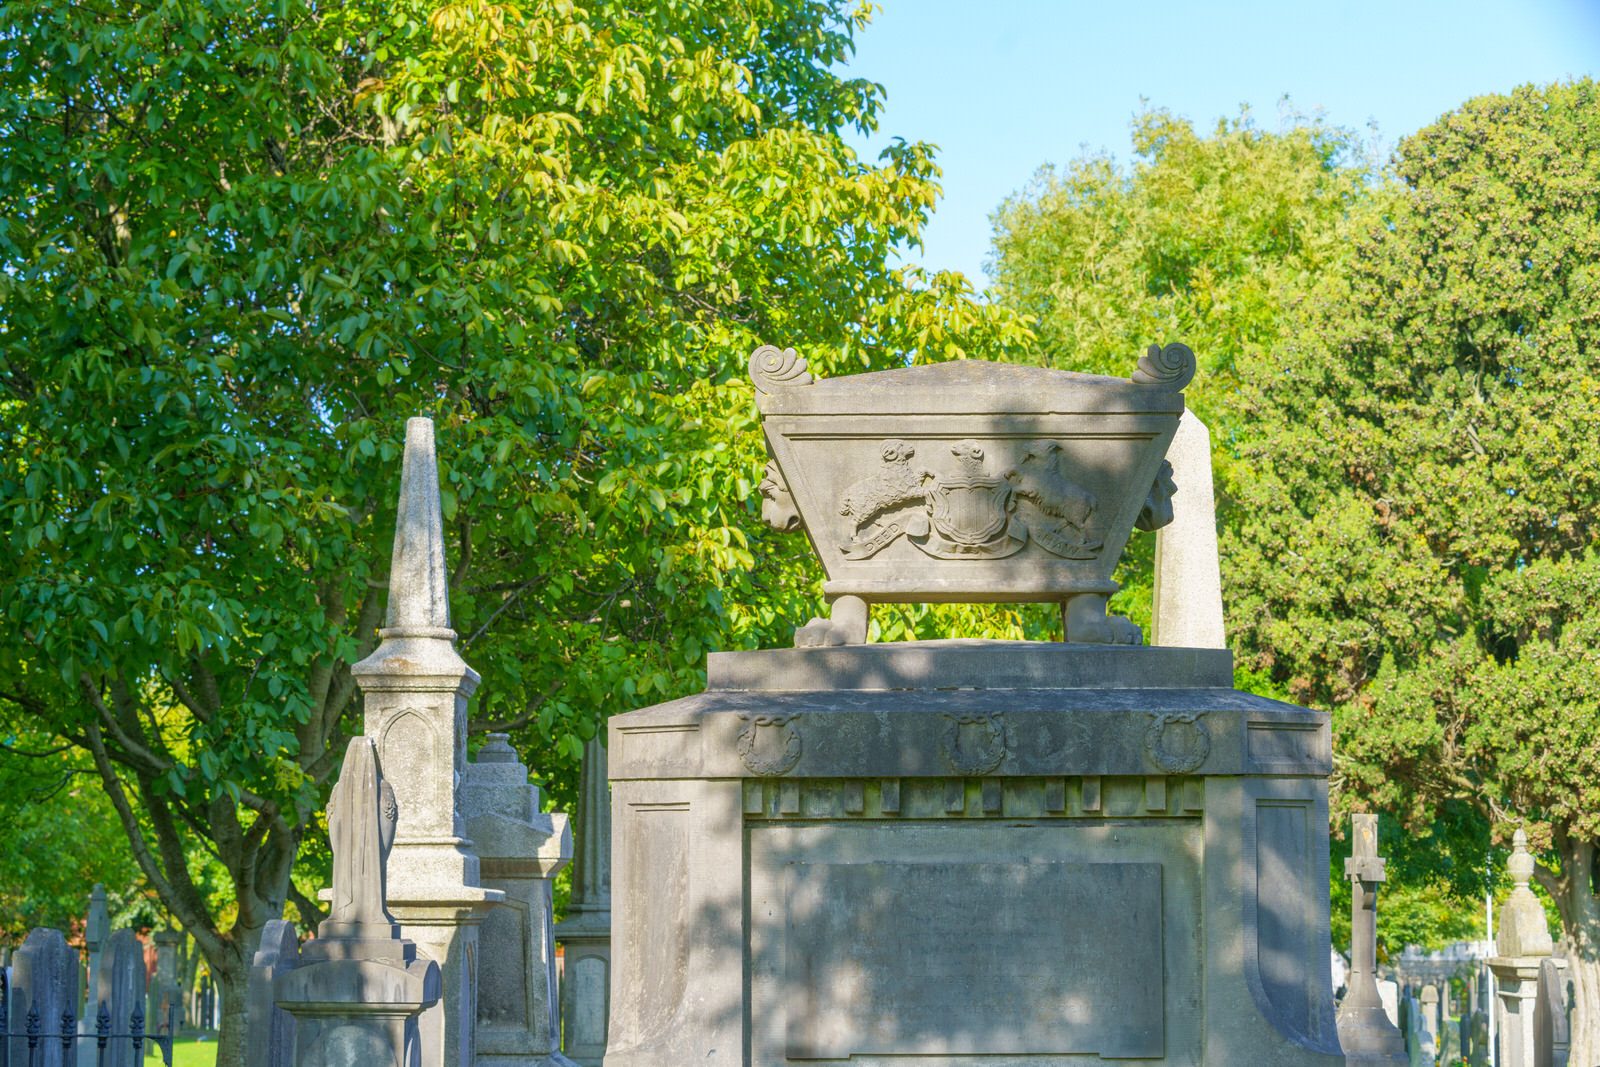 THE OLDER SECTION OF GLASNEVIN CEMETERY [I USED A SONY 70-200MM GM LENS] 006